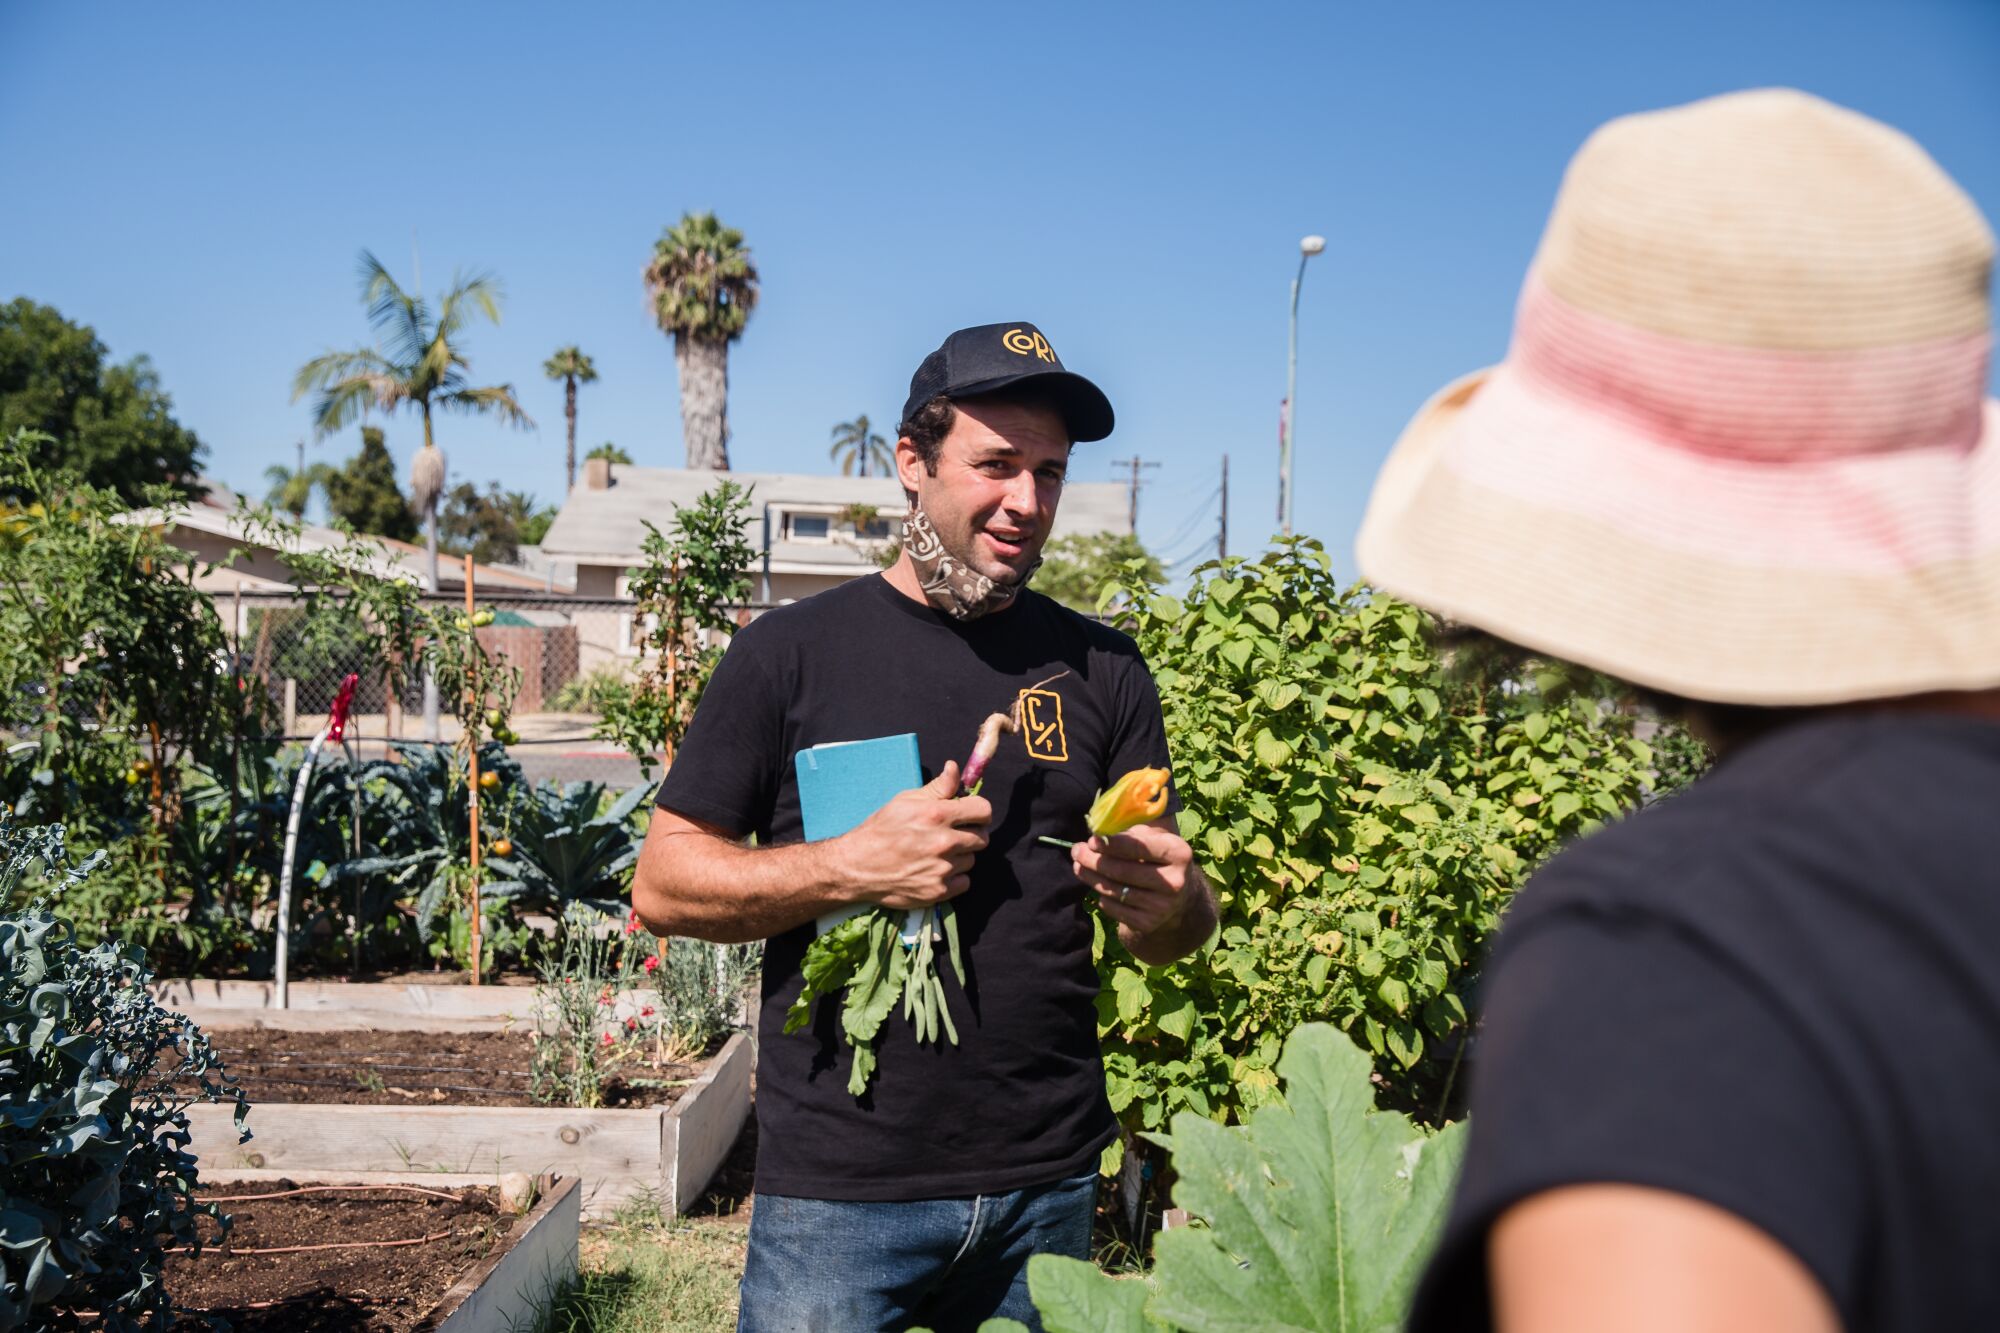 Accursio Lota, owner of Cori Pastificio Trattoria talks about the vegetables growing in the garden with Anchi Mei. 